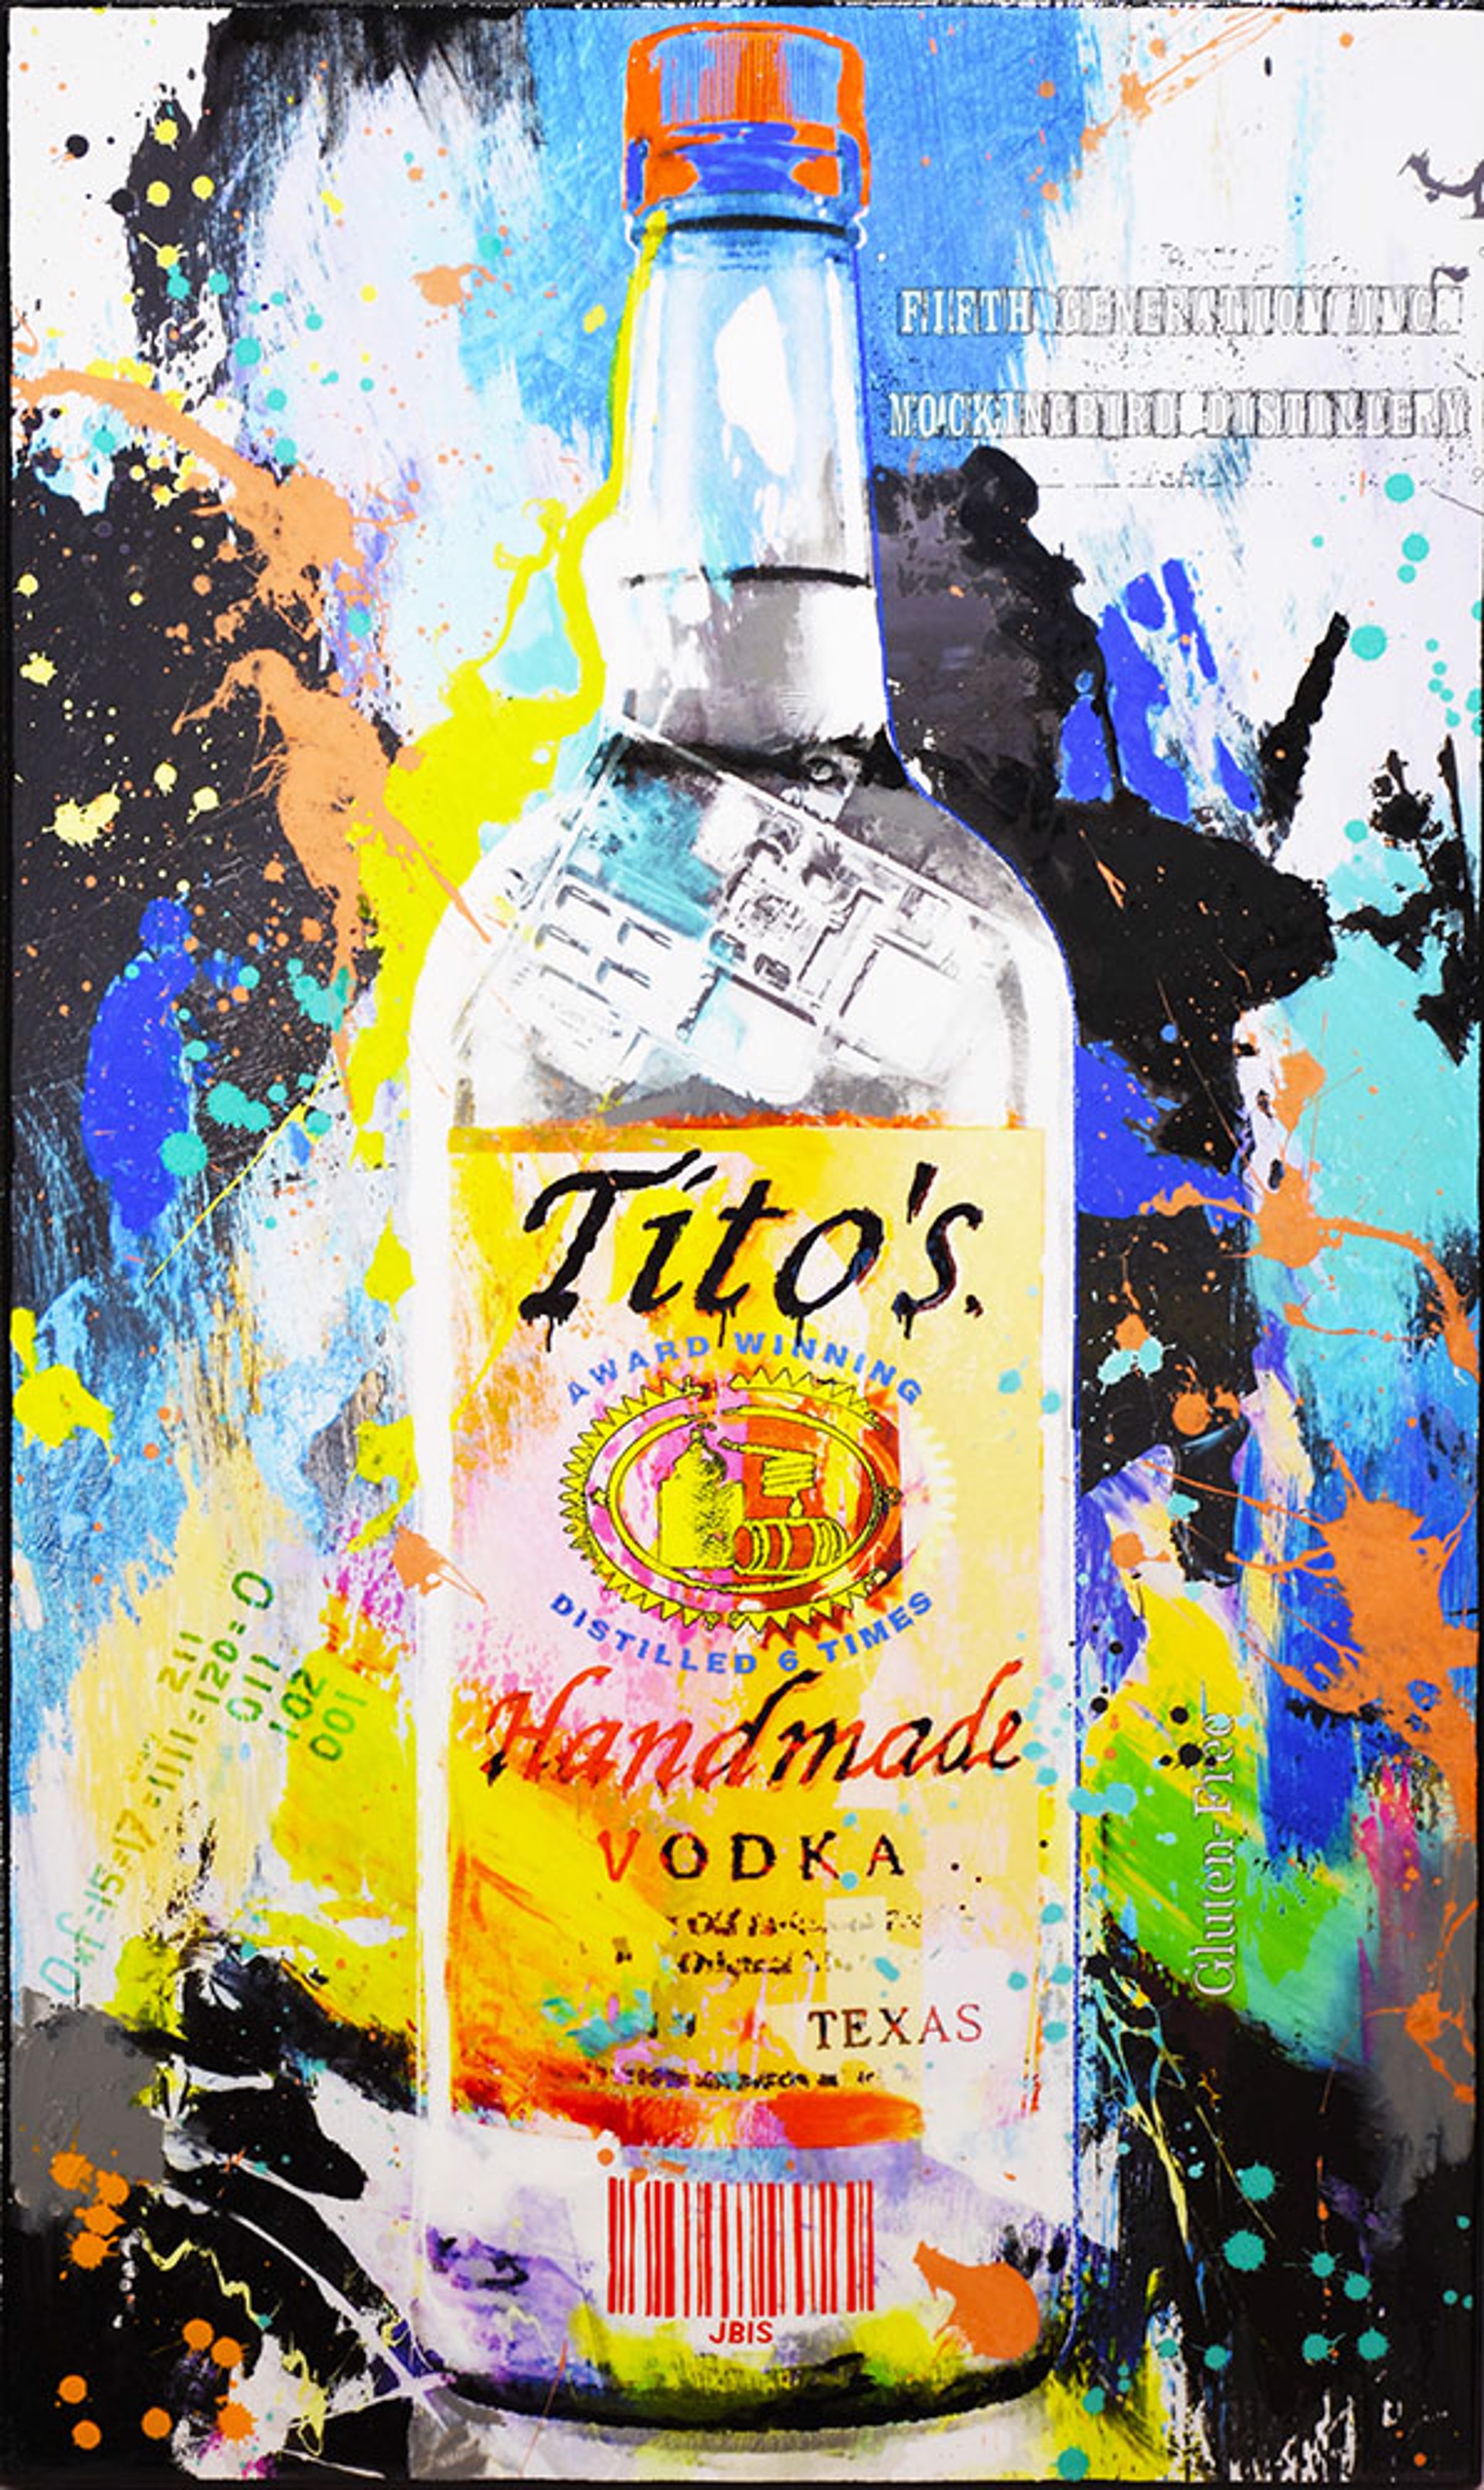 Handmade (Tito's) by Bisaillon Brothers